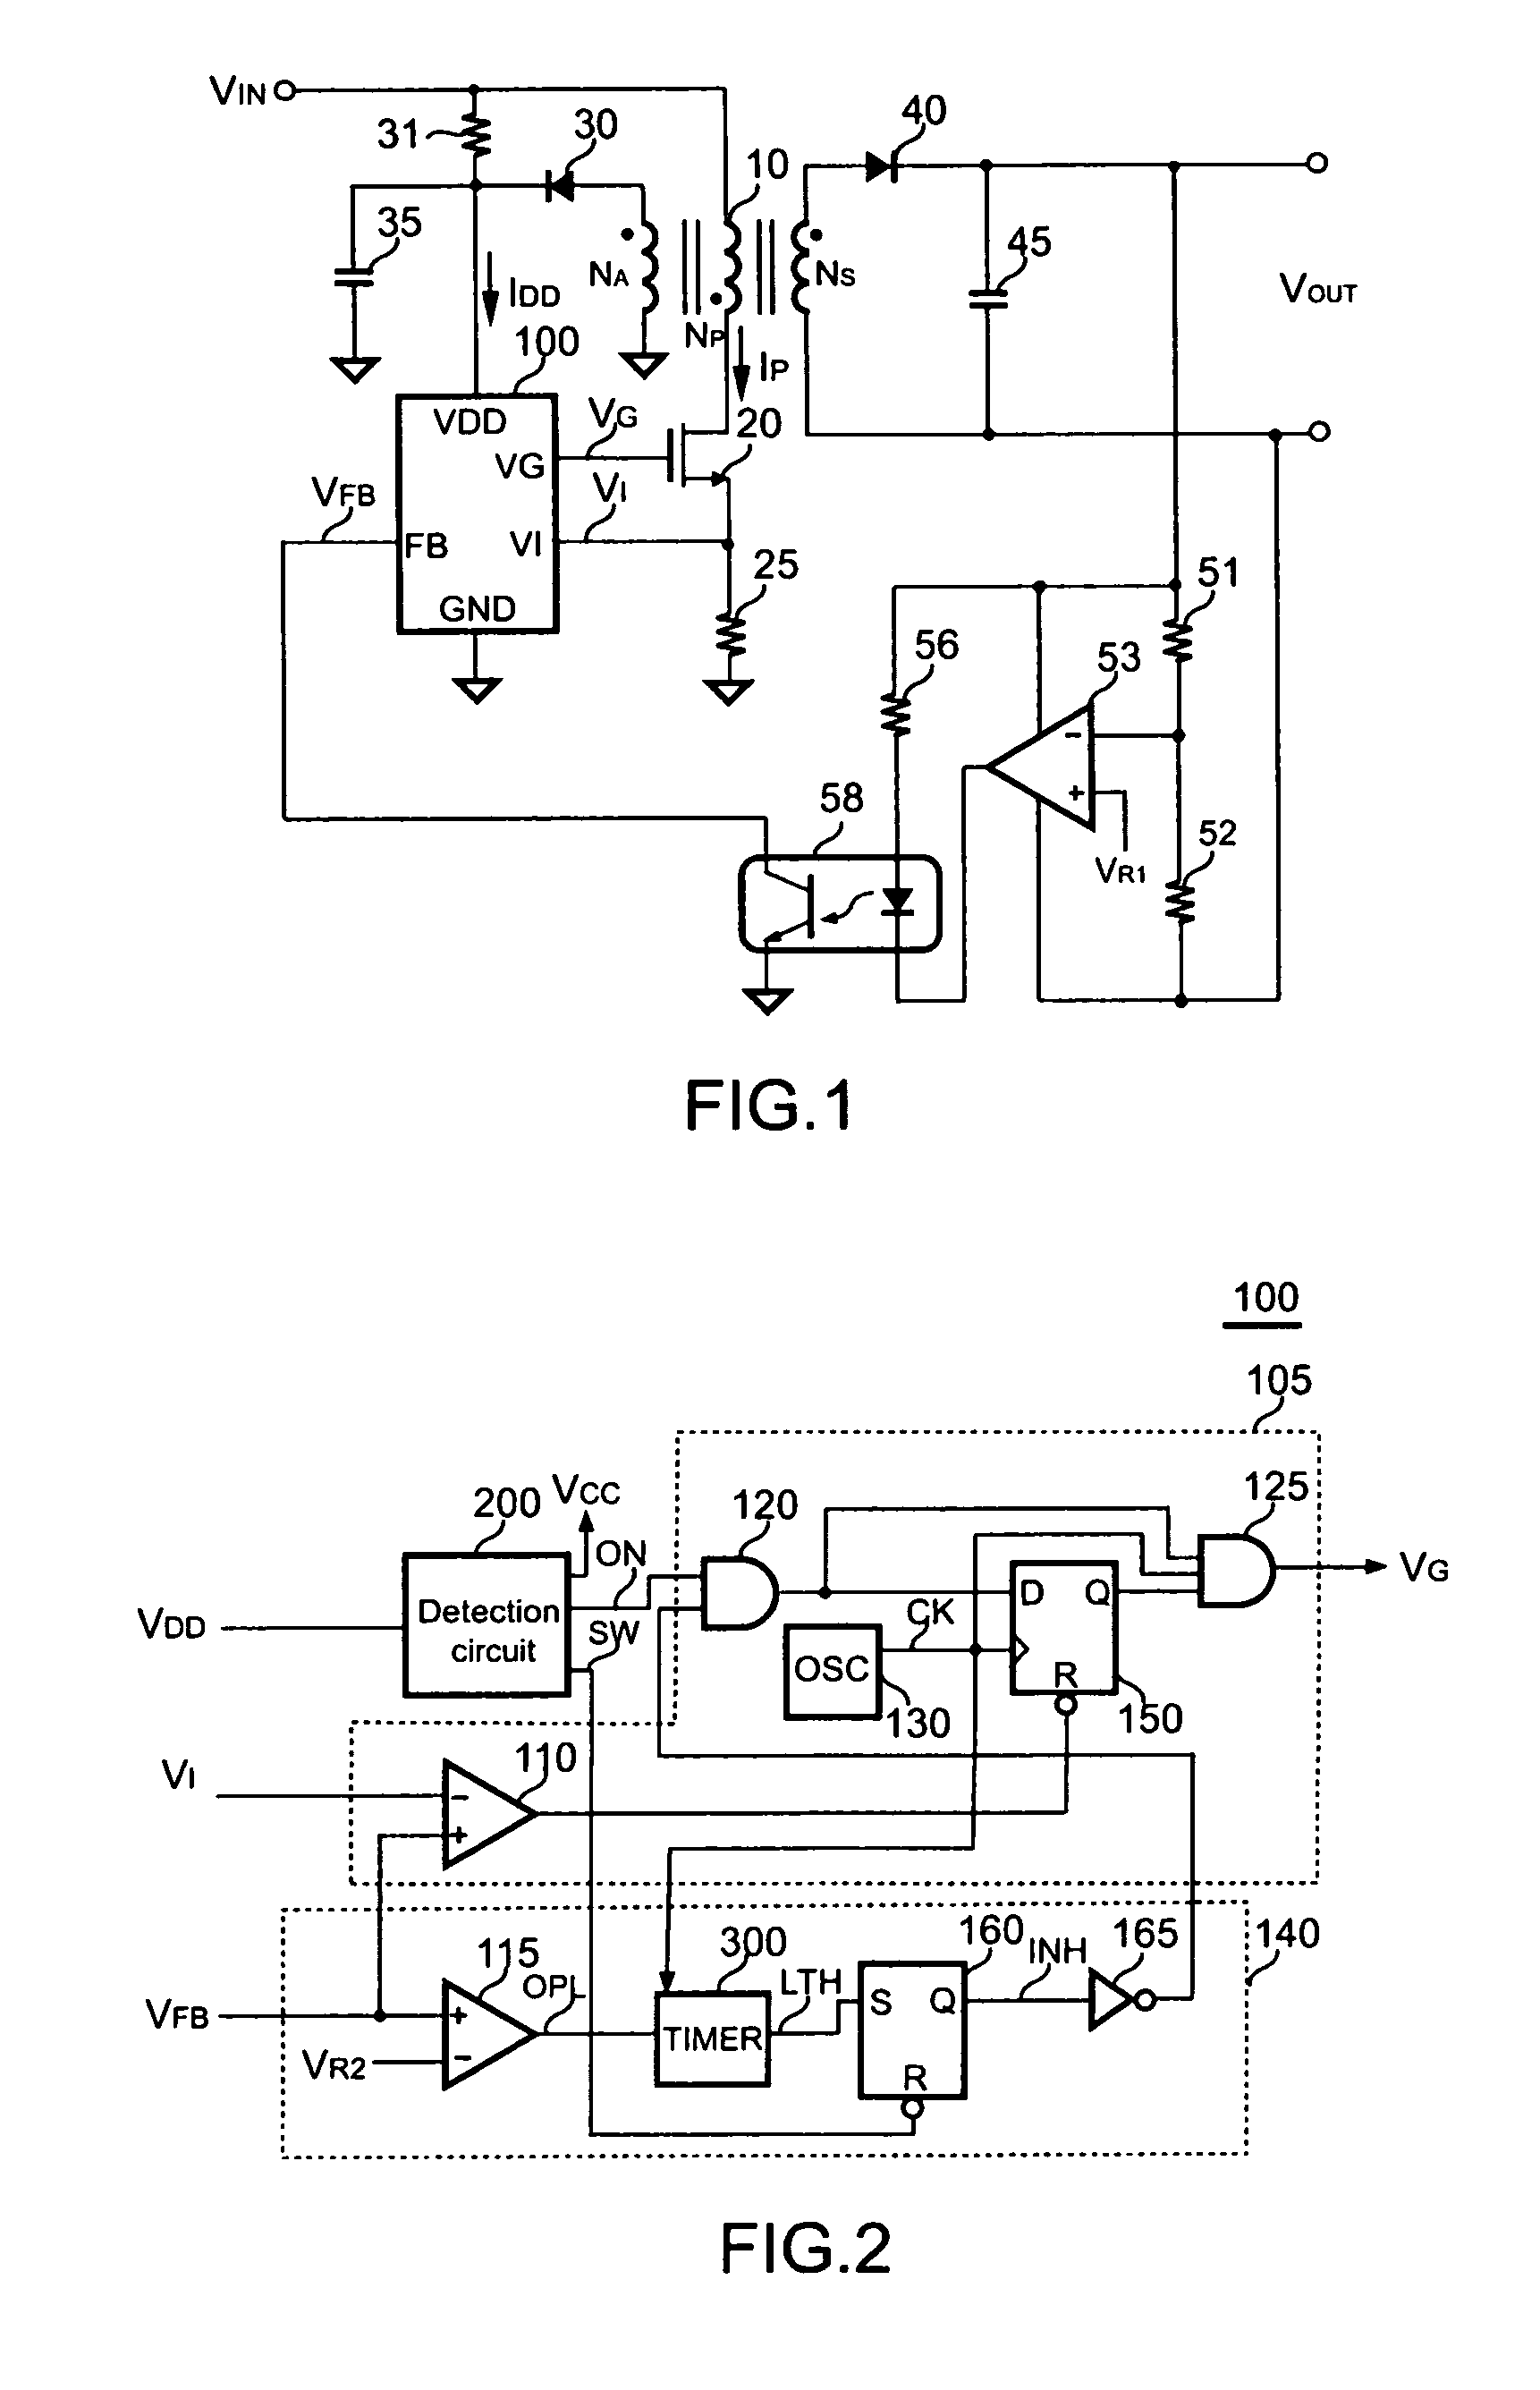 Control circuit having two-level under voltage lockout threshold to improve the protection of power supply